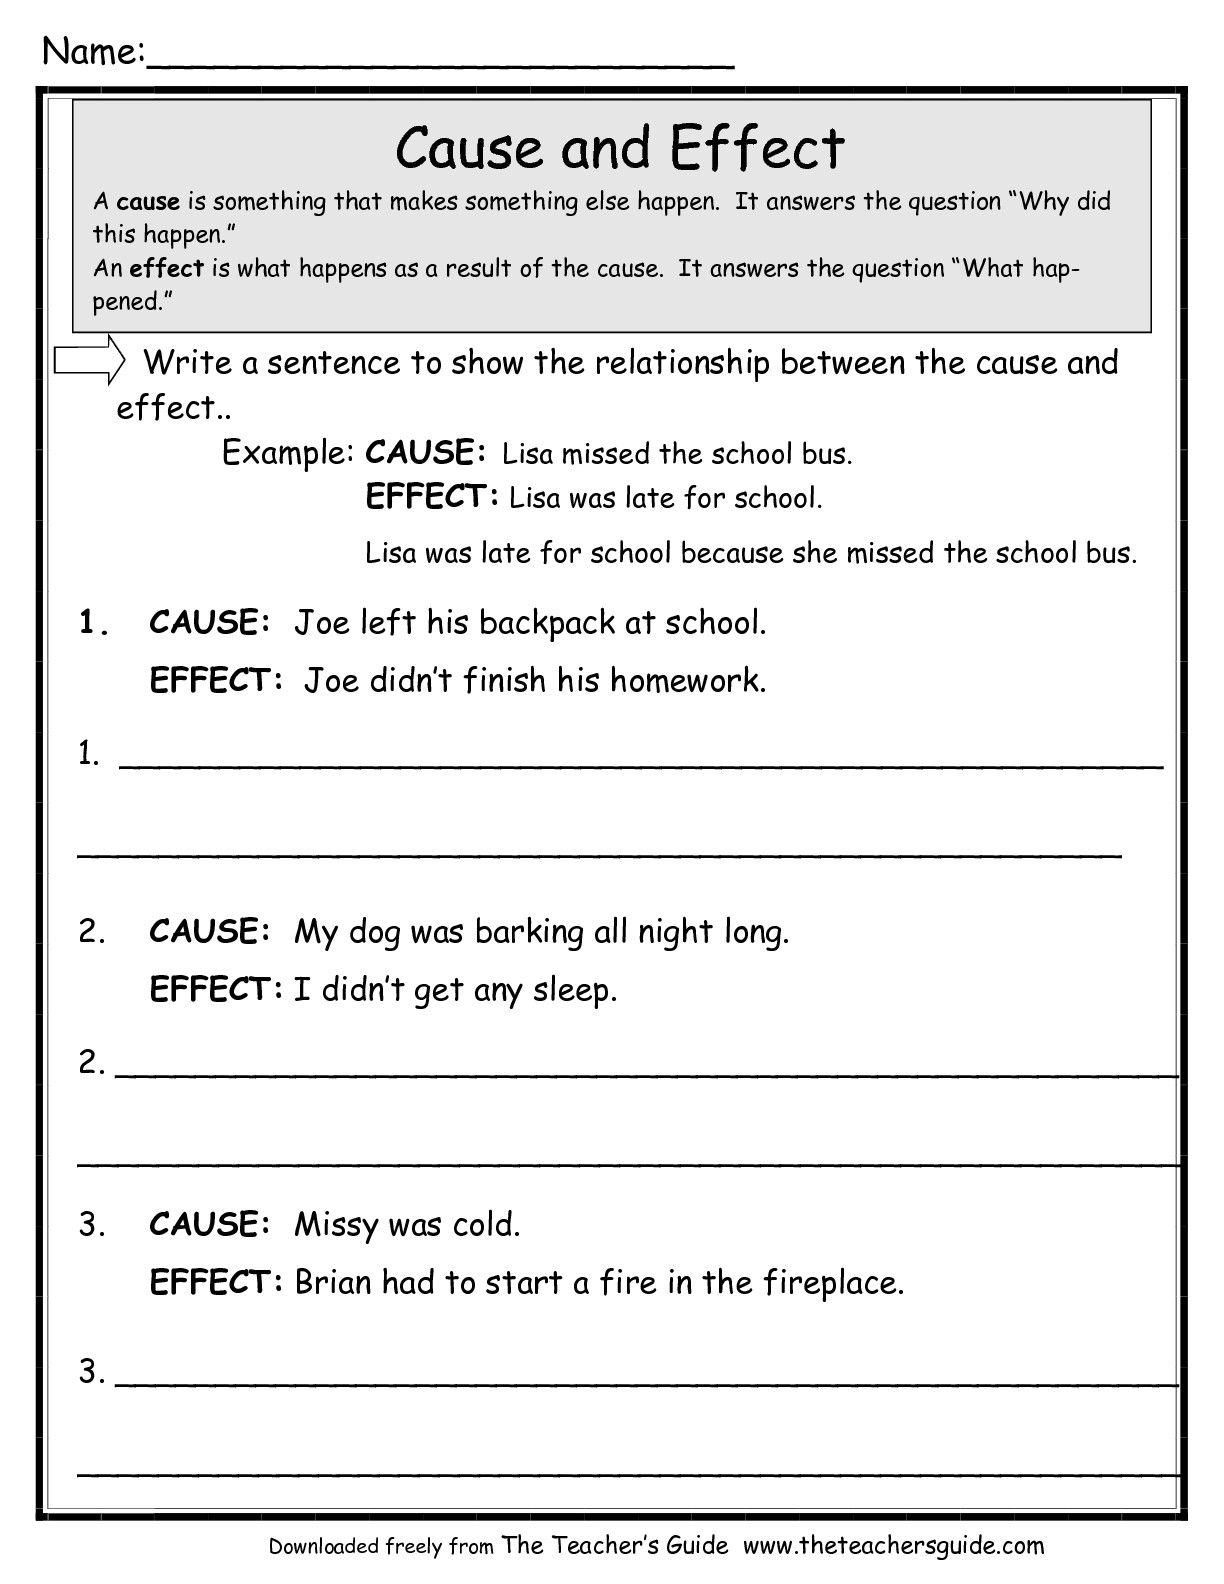 Cause And Effect Worksheets From The Teacher's Guide to Worksheet